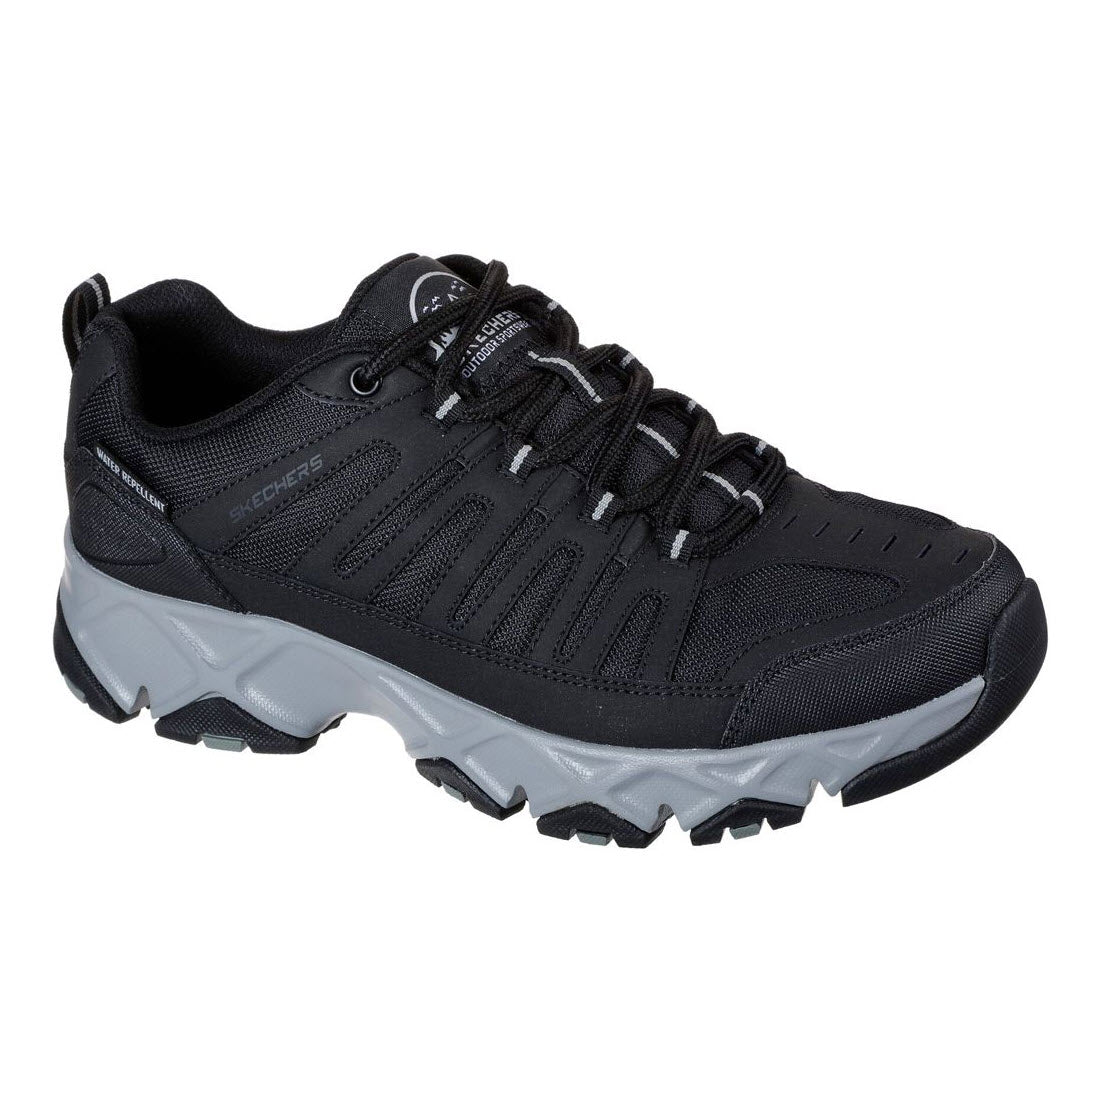 Black Skechers Crossbar Stilholt trail running shoe with rugged sole on a white background.